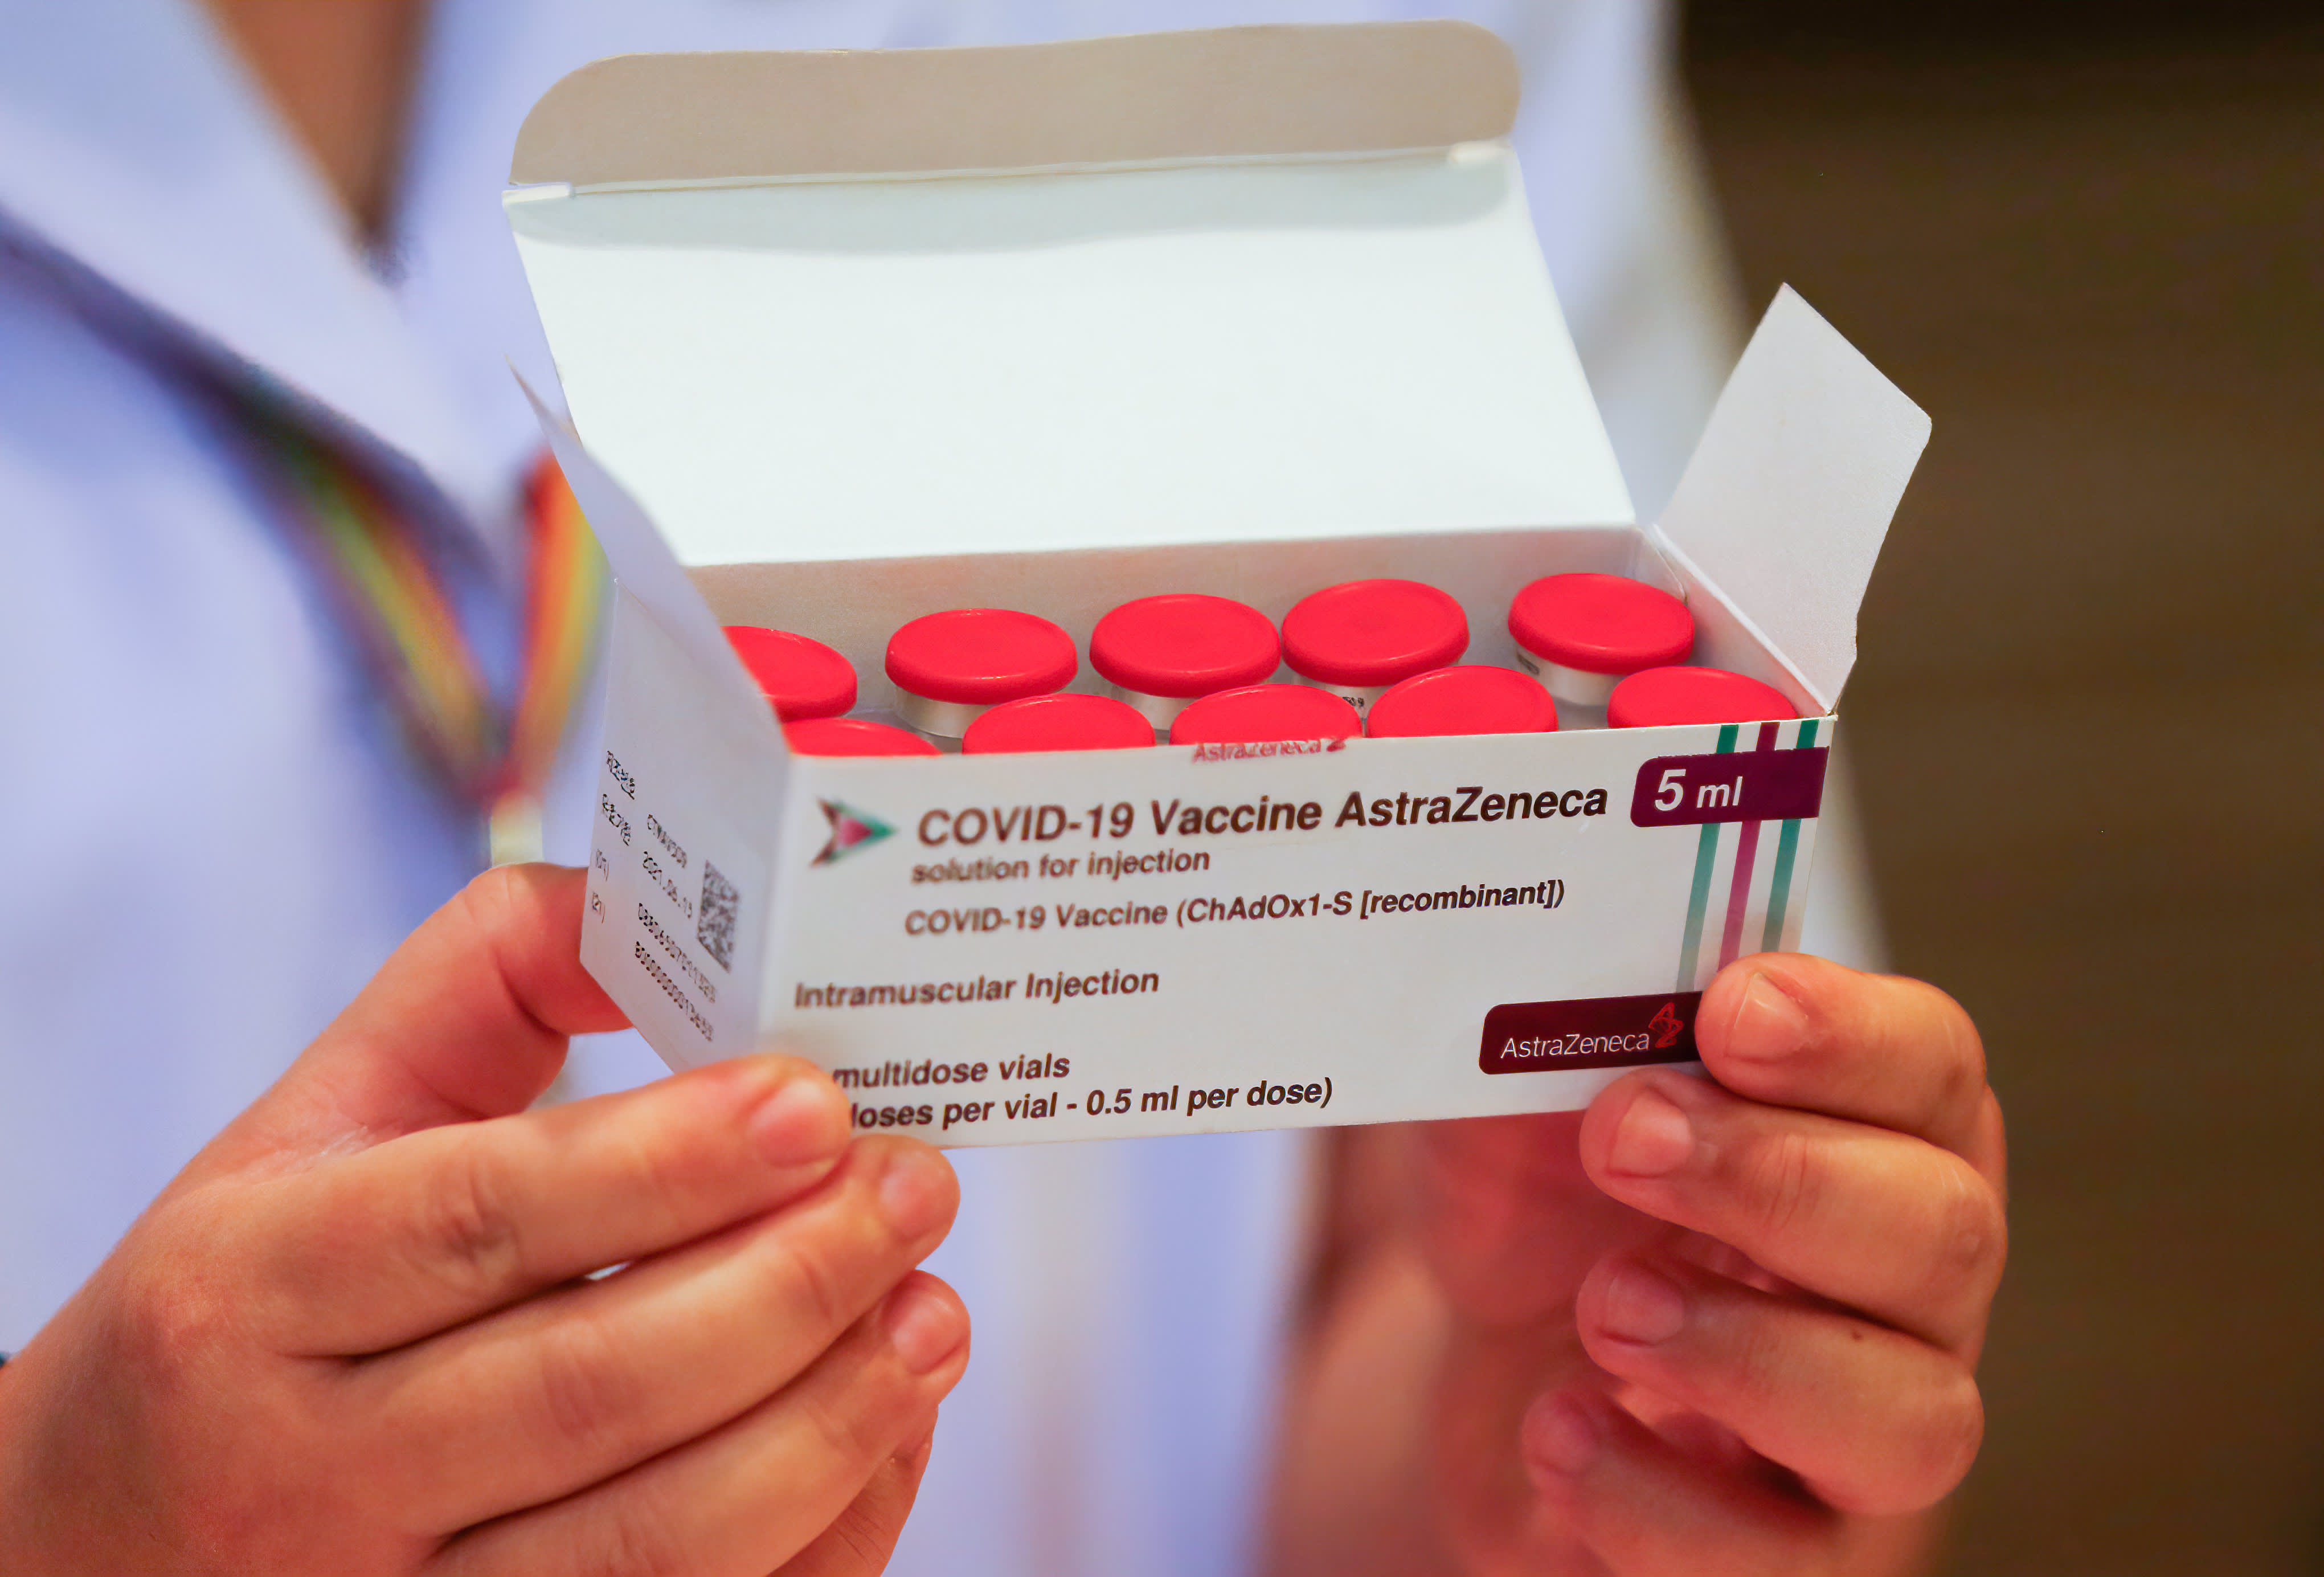 AstraZeneca Covid vaccine has been suspended in some countries for fear of blood clots